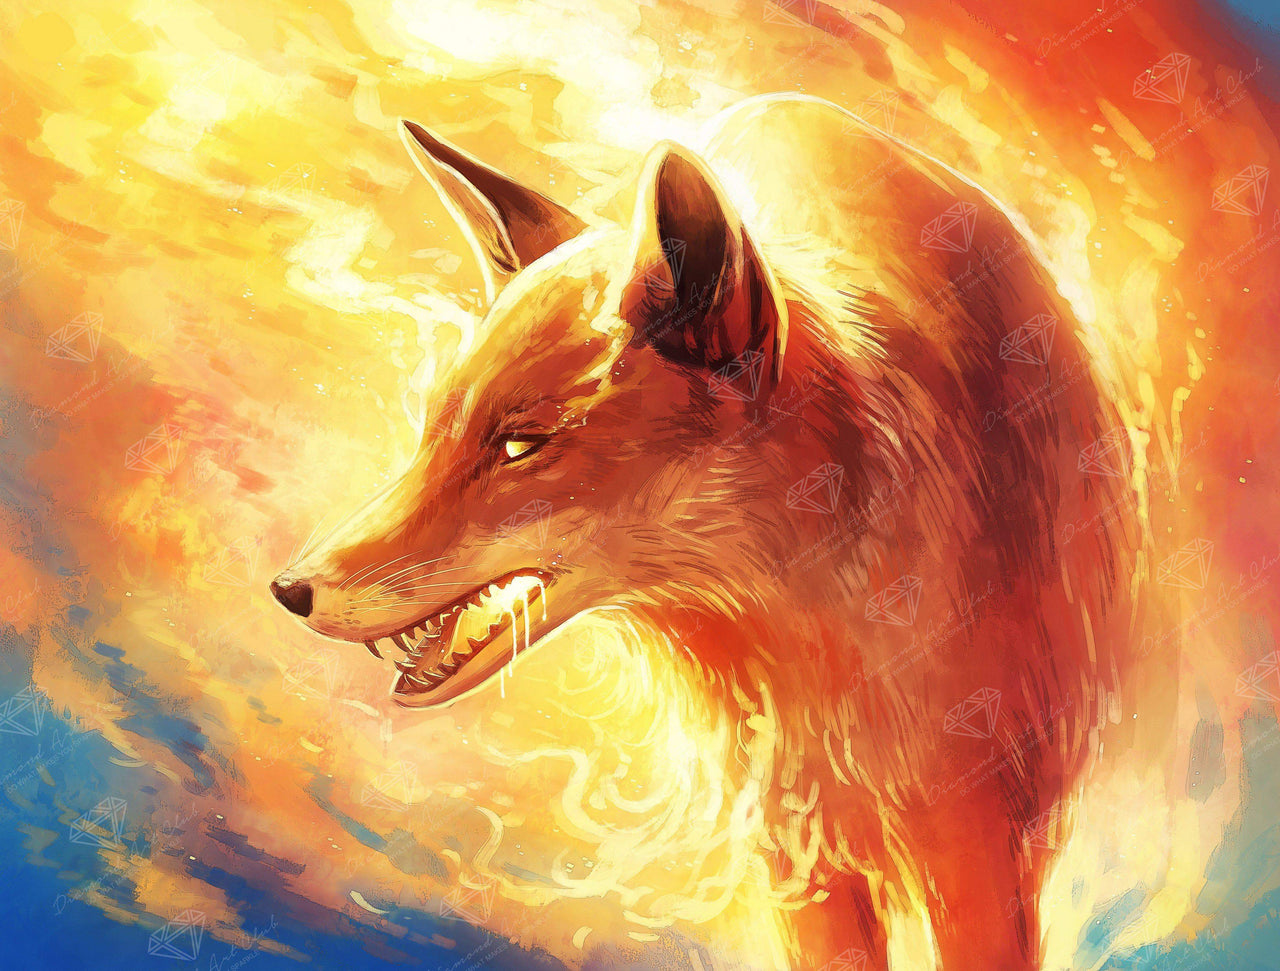 Diamond Painting Fire Fox 16.5" x 21.7" (42cm x 55cm) / Round With 30 Colors Including 1 AB / 28,860